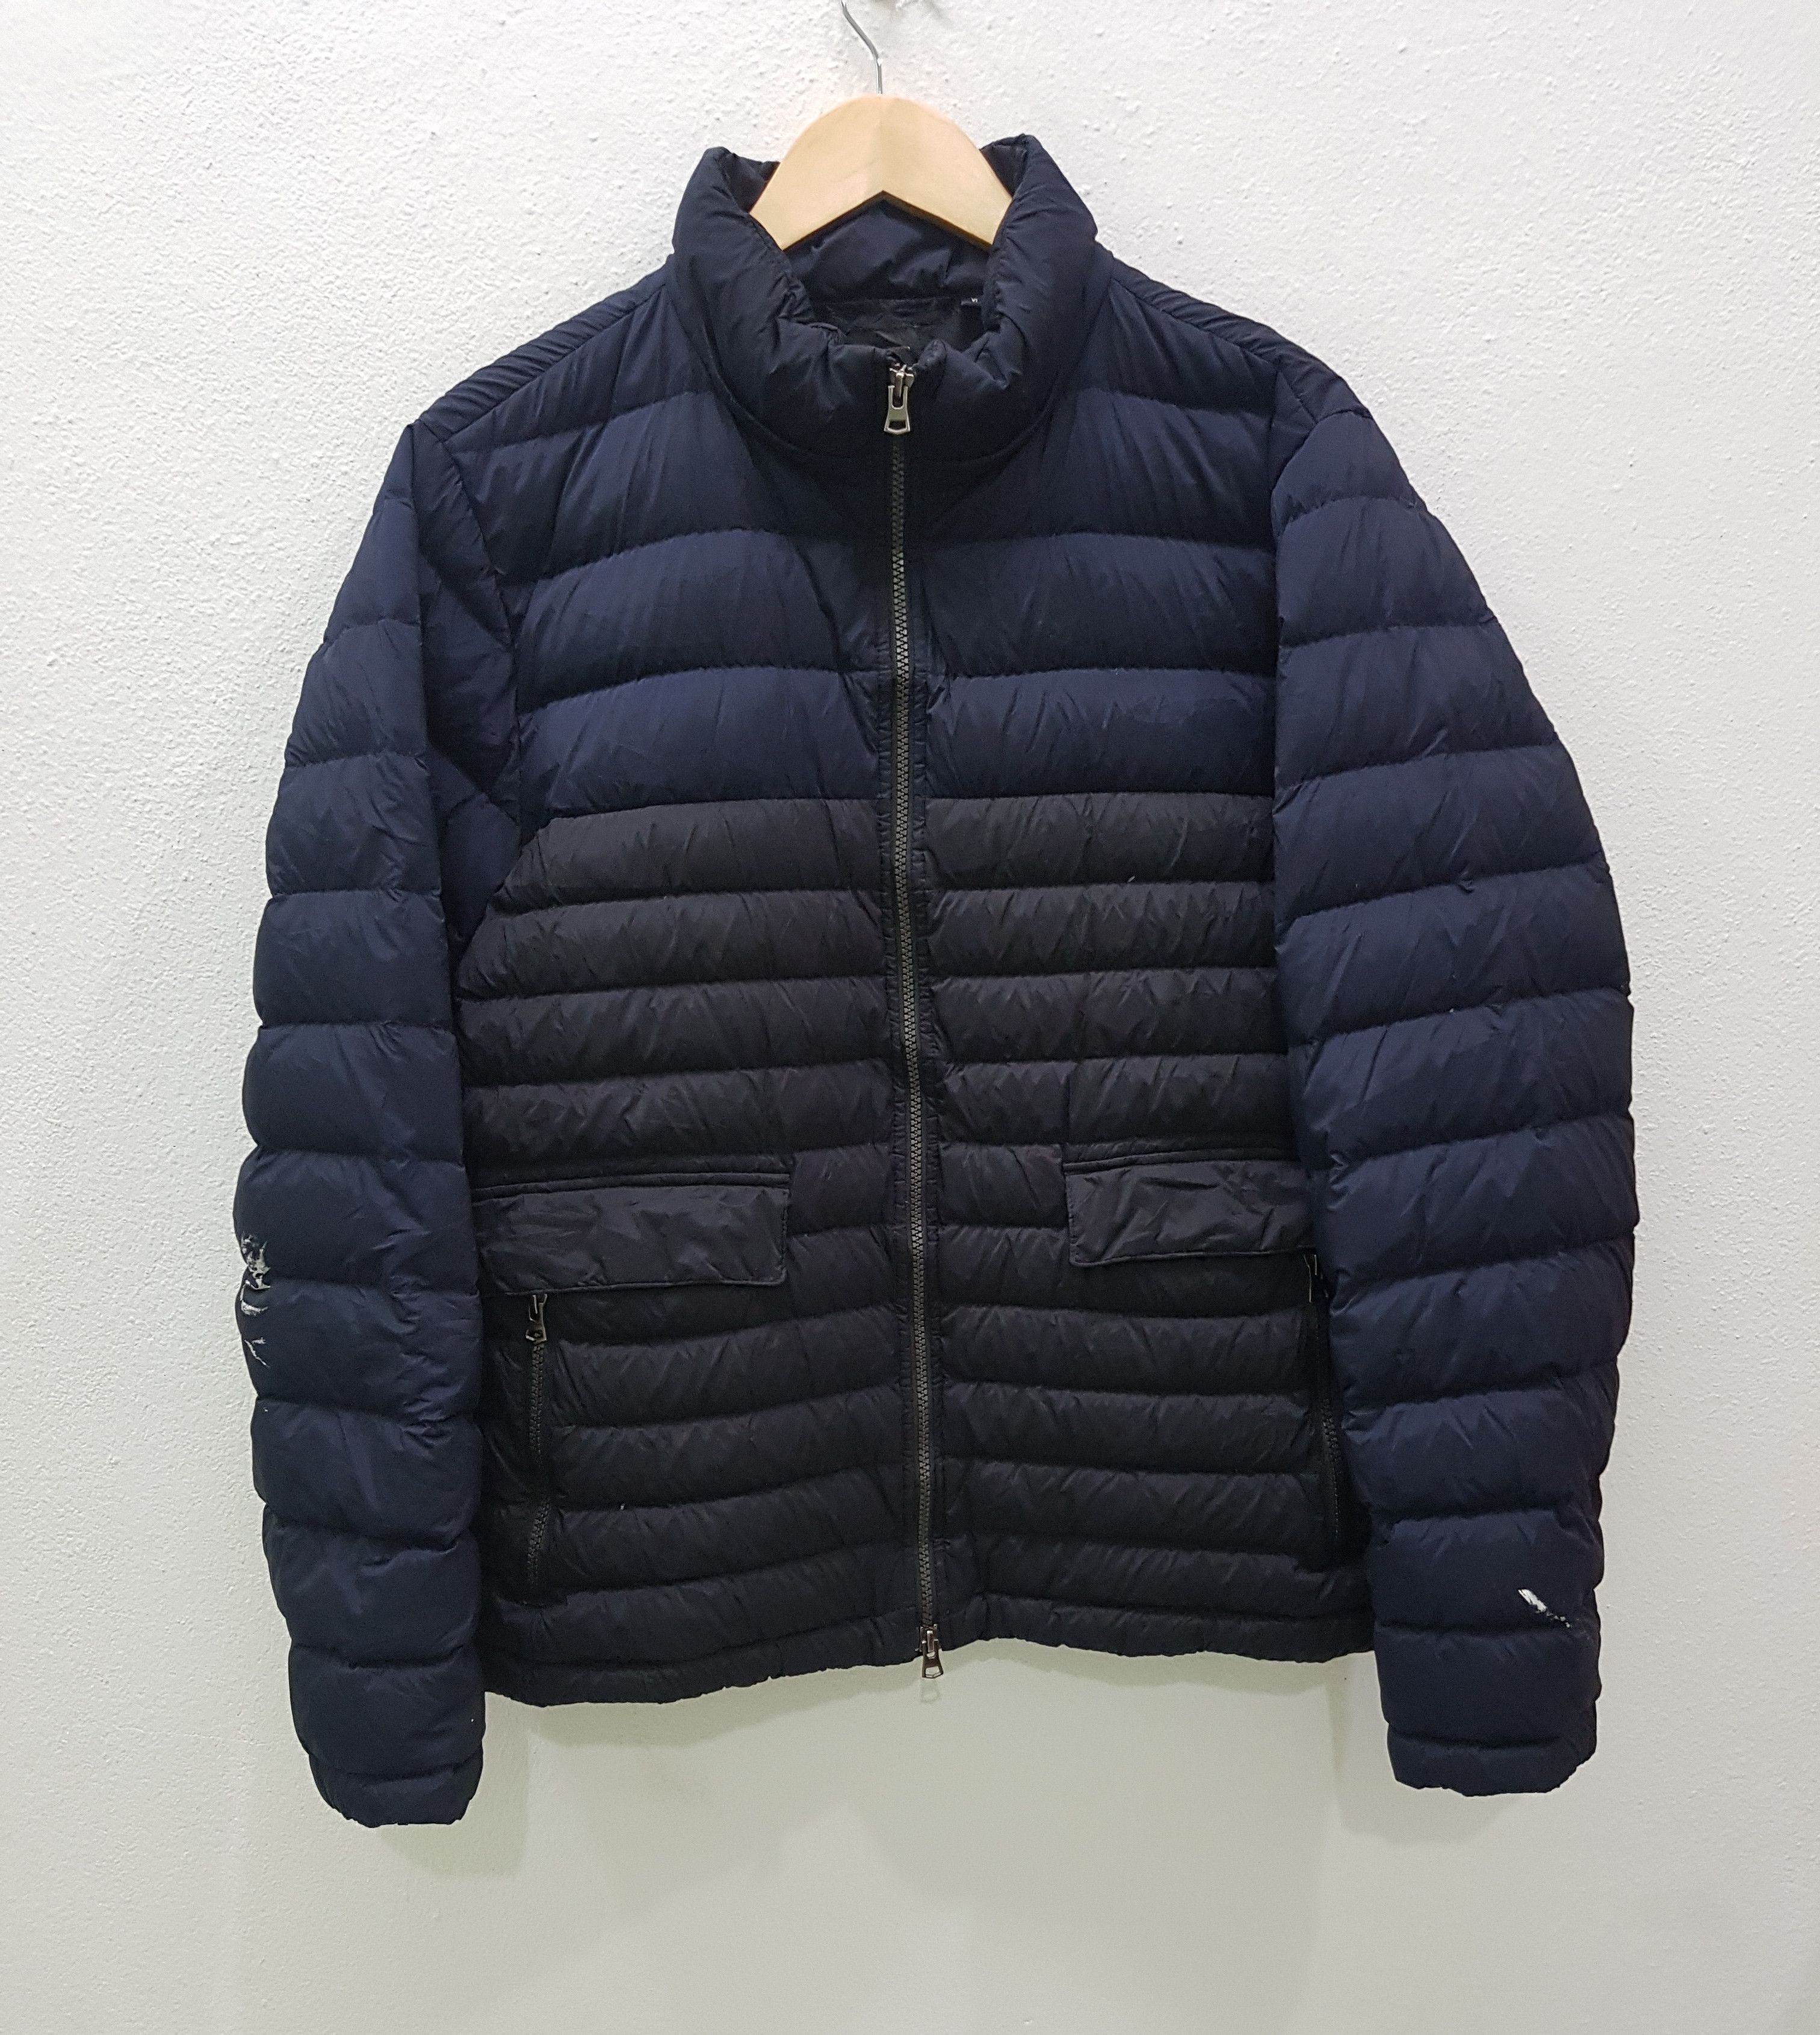 Uniqlo Uniqlo T.Down By Theory Bomber Jacket Full Zipper Down Feather ...